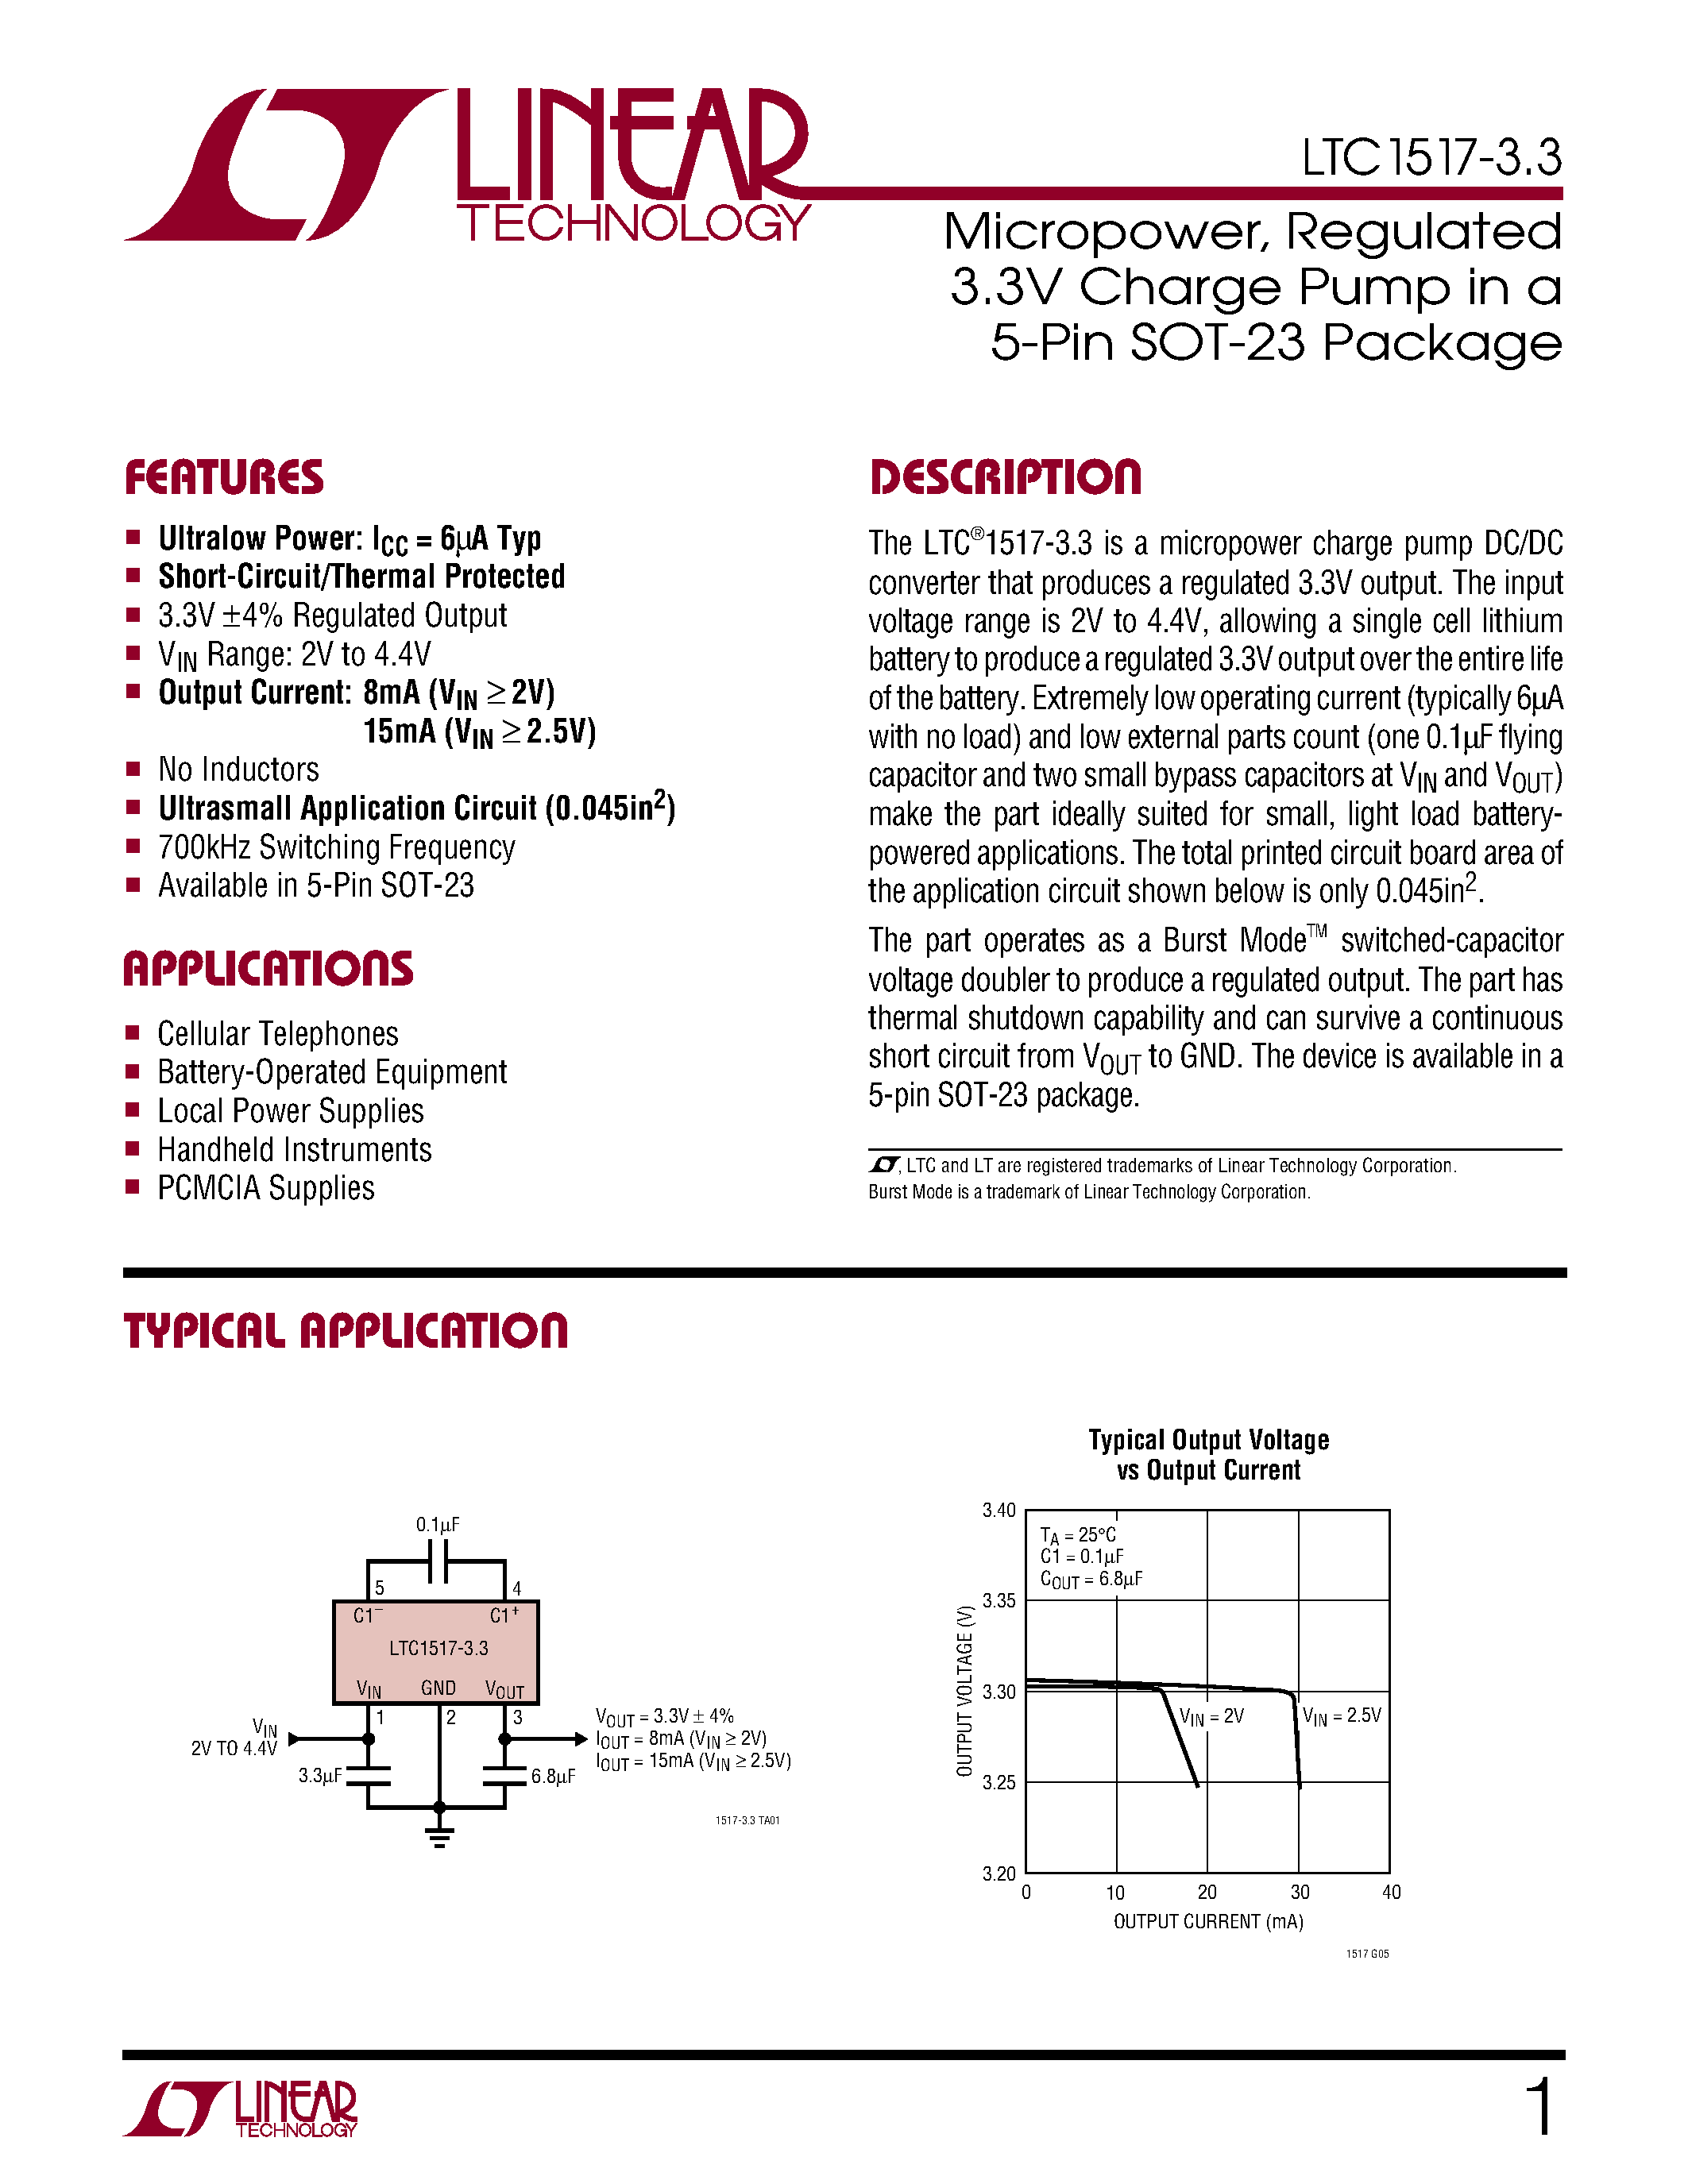 Datasheet LTC1517-3.3 - Micropower/ Regulated 3.3V Charge Pump in a 5-Pin SOT-23 Package page 1